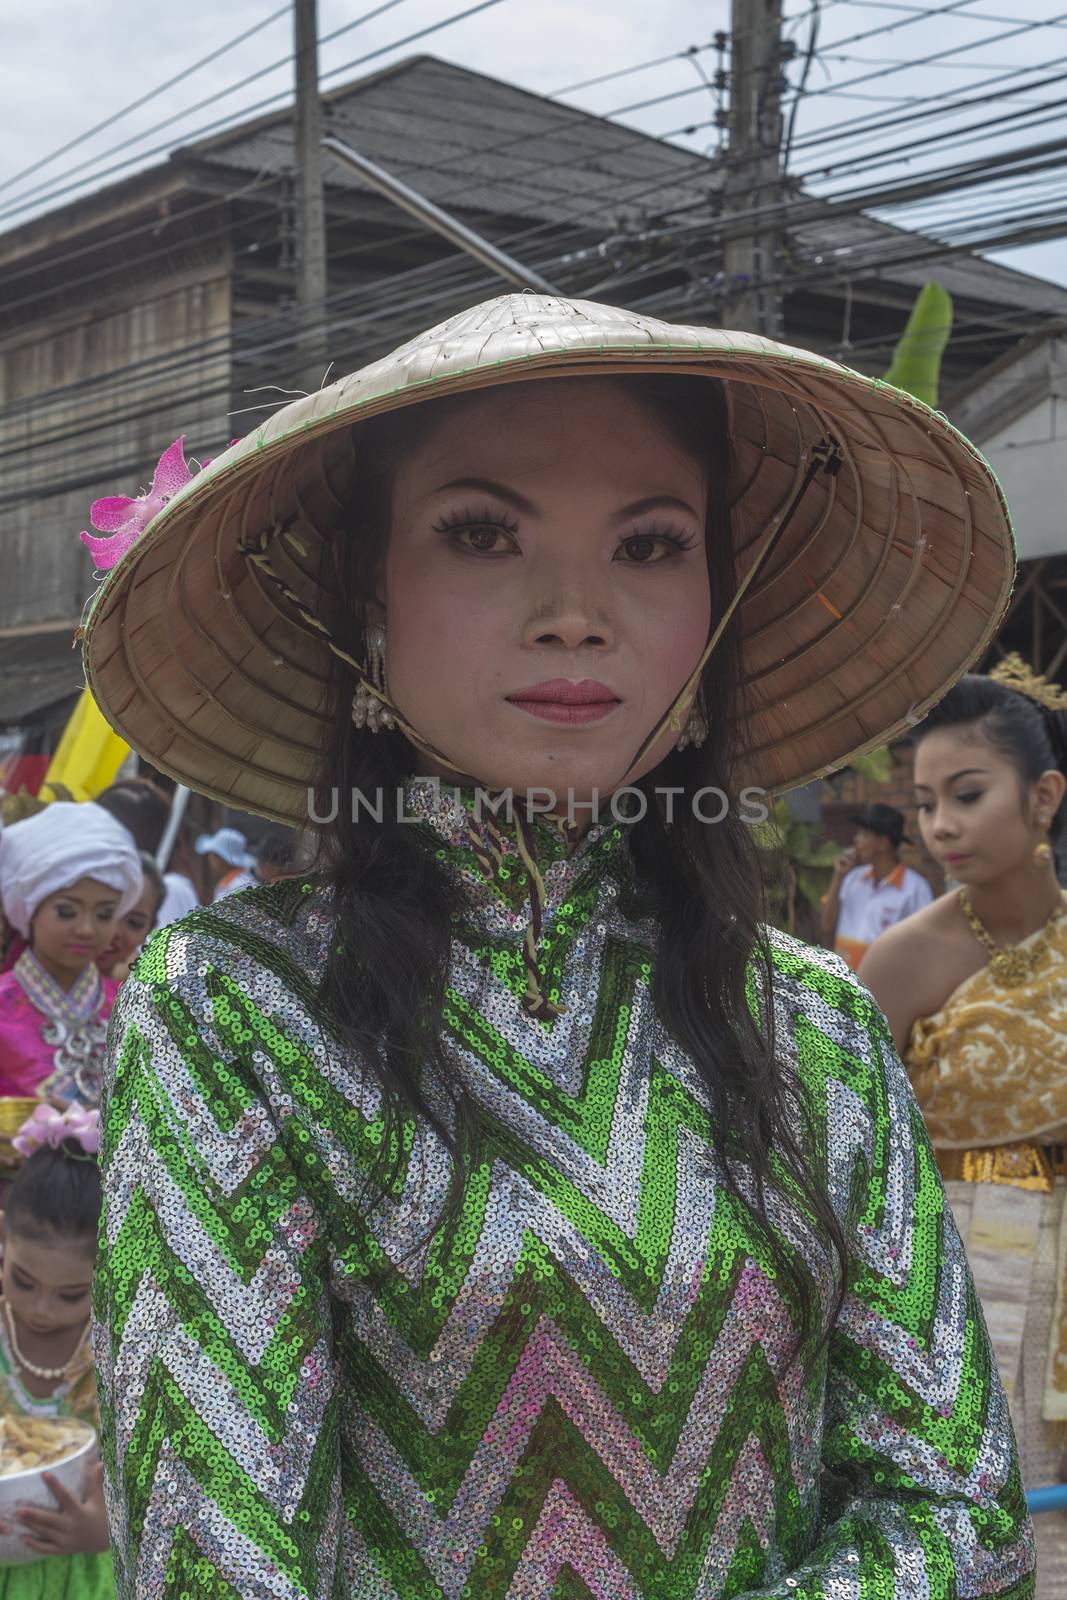 THAILAND - OCTOBER 20: Unidentified woman participates in "Ngan Chak Pra", a traditional buddhist festival on October 20, 2013 in Chaiya,Suratthani, Thailand.